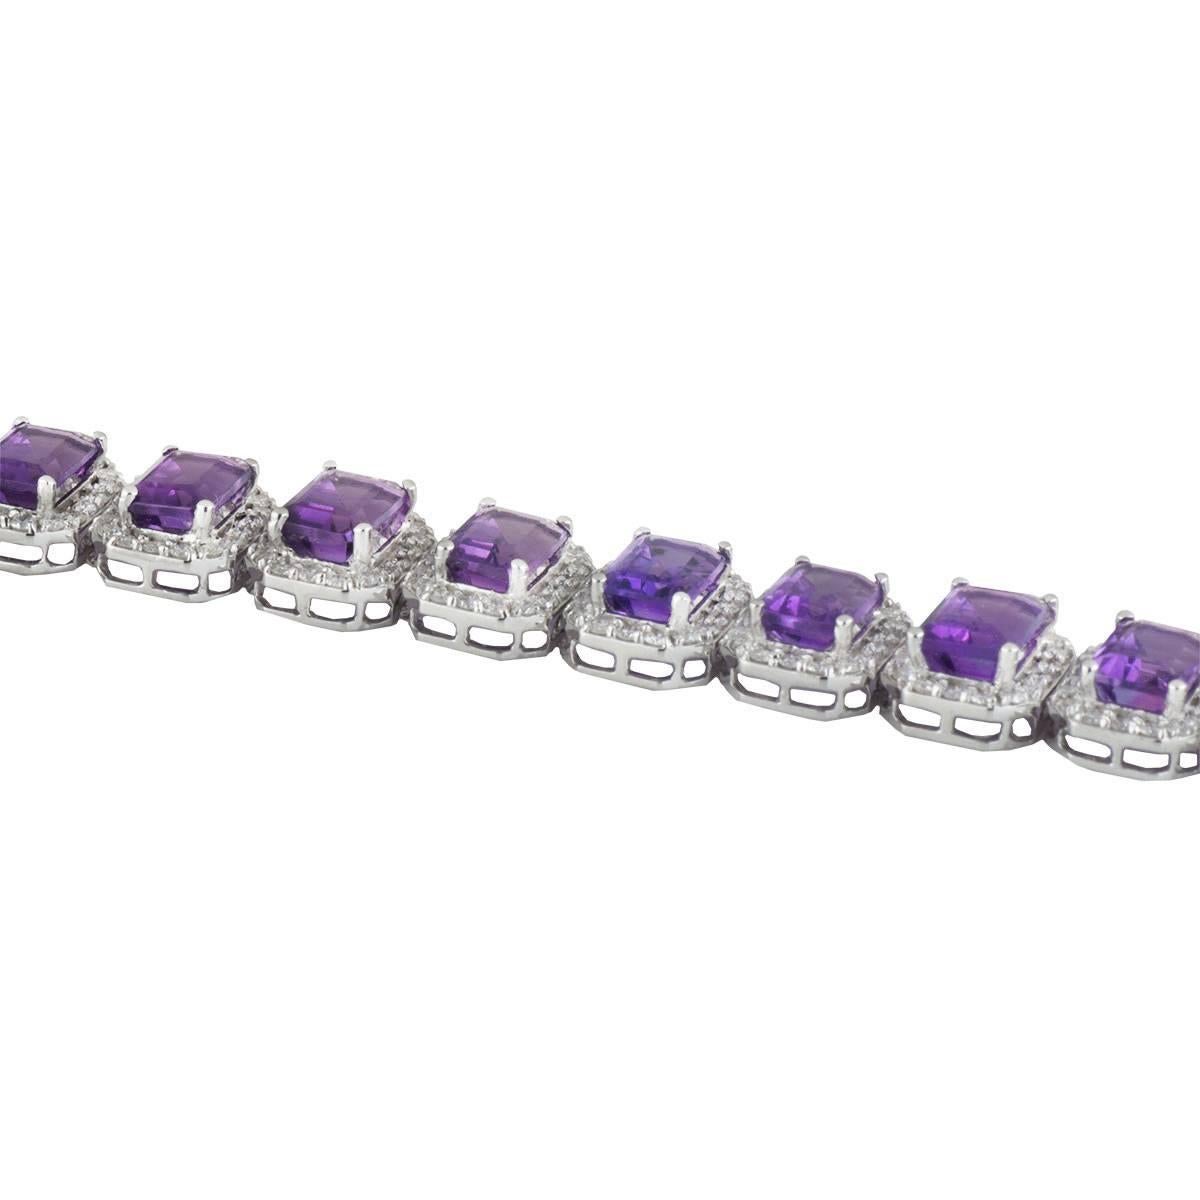 A lovely 18k white gold diamond and amethyst line bracelet. The bracelet comprises of 16 links of emerald cut peridots with a halo of round brilliant cut diamonds around each. There are 20 emerald cut amethysts with a total weight of 20.38ct with a